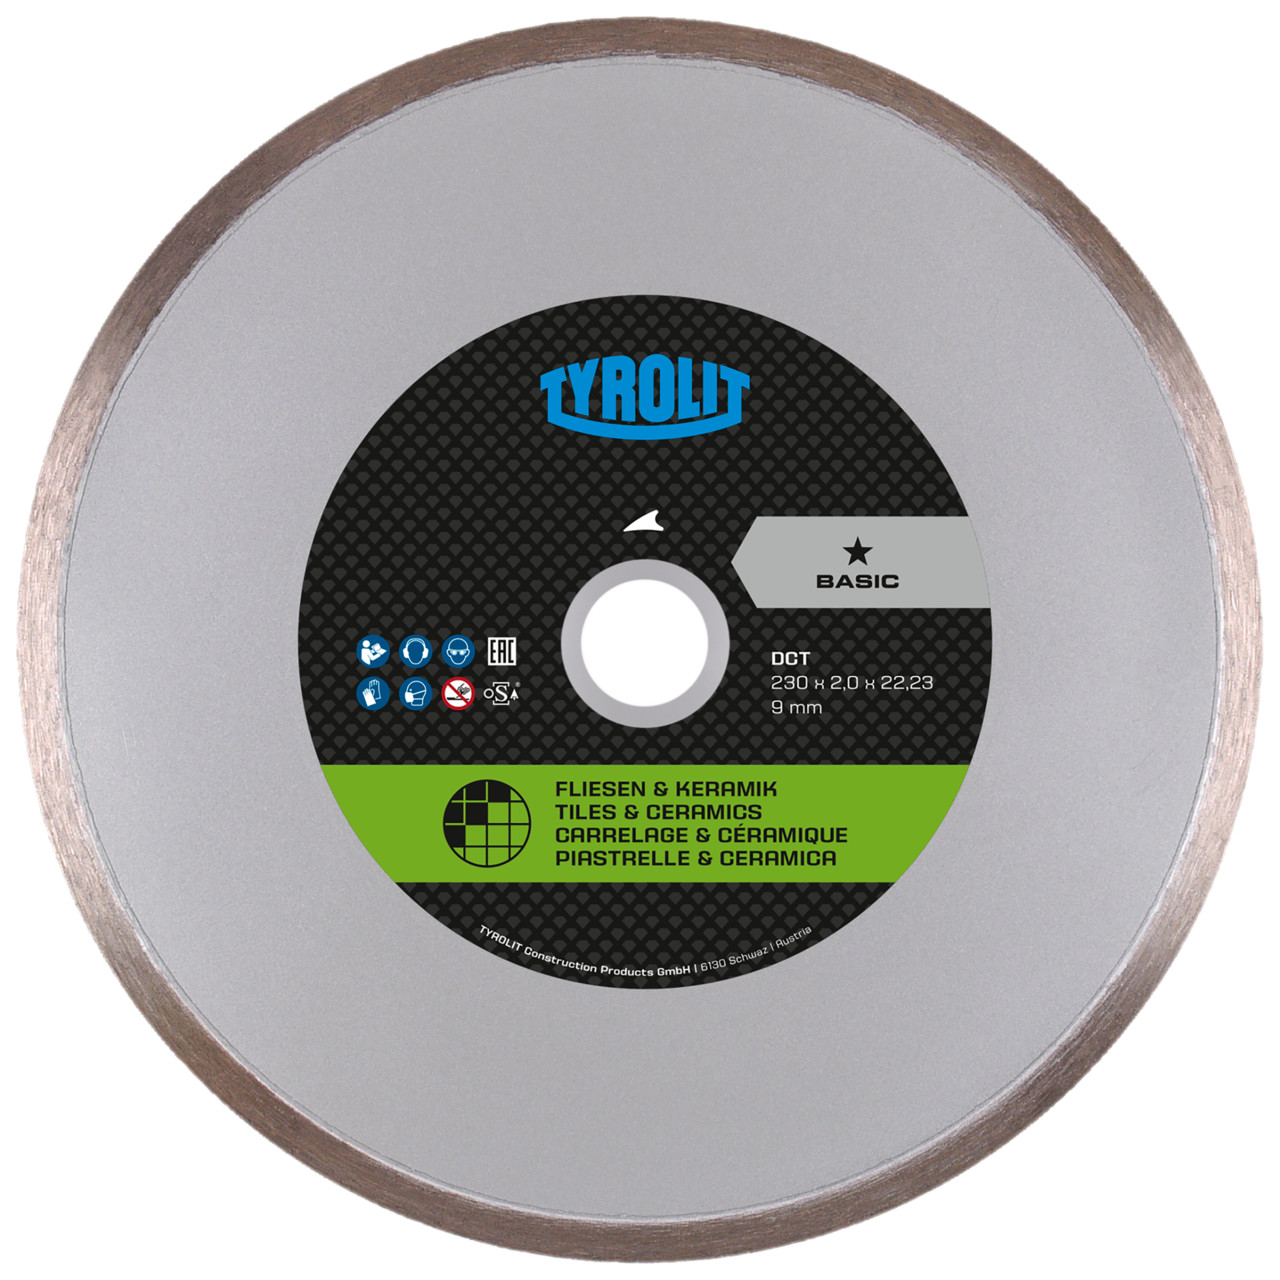 Tyrolit Dry-cutting saw blades DxDxH 100x1.6x22.23 DCT, shape: 1A1R (cutting disc with continuous cutting wheel), Art. 475975